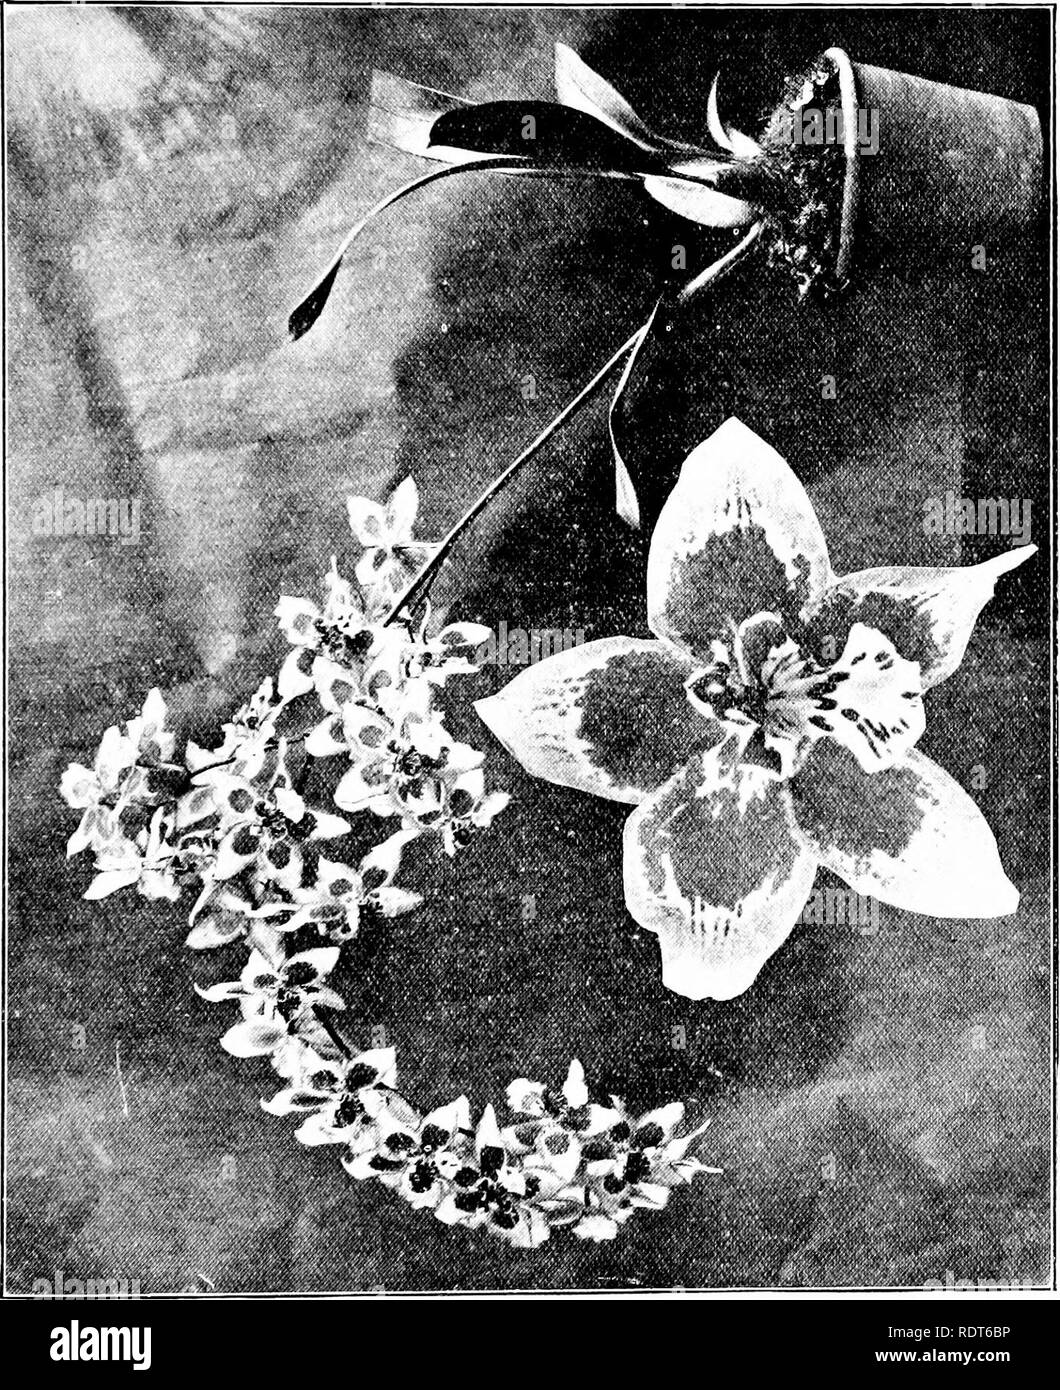 . The orchid stud-book: an enumeration of hybrid orchids of artificial origin, with their parents, raisers, date of first flowering, references to descriptions and figures, and synonymy. With an historical introduction and 120 figures and a chapter on hybridising and raising orchids from seed. Orchids. Part II. Supply THE ORCHID STUD-BOOK. 281 5. 0. X Yuylstekese (C. Noetzliana x O. nobile), G.C. 1904, i. 360, f. 159; June 4, Suppl. 2; 1906, ii. 47, ff. 21, 22; 1907, ii. 63; O.K. 1904, 181, 189, 209, f. 34; 1906, 217, f. 26; G.M. 1904, 376, f. ; J.H. 1904, i. 487, f. ; Gard. 1904, i. 433, f. ; Stock Photo